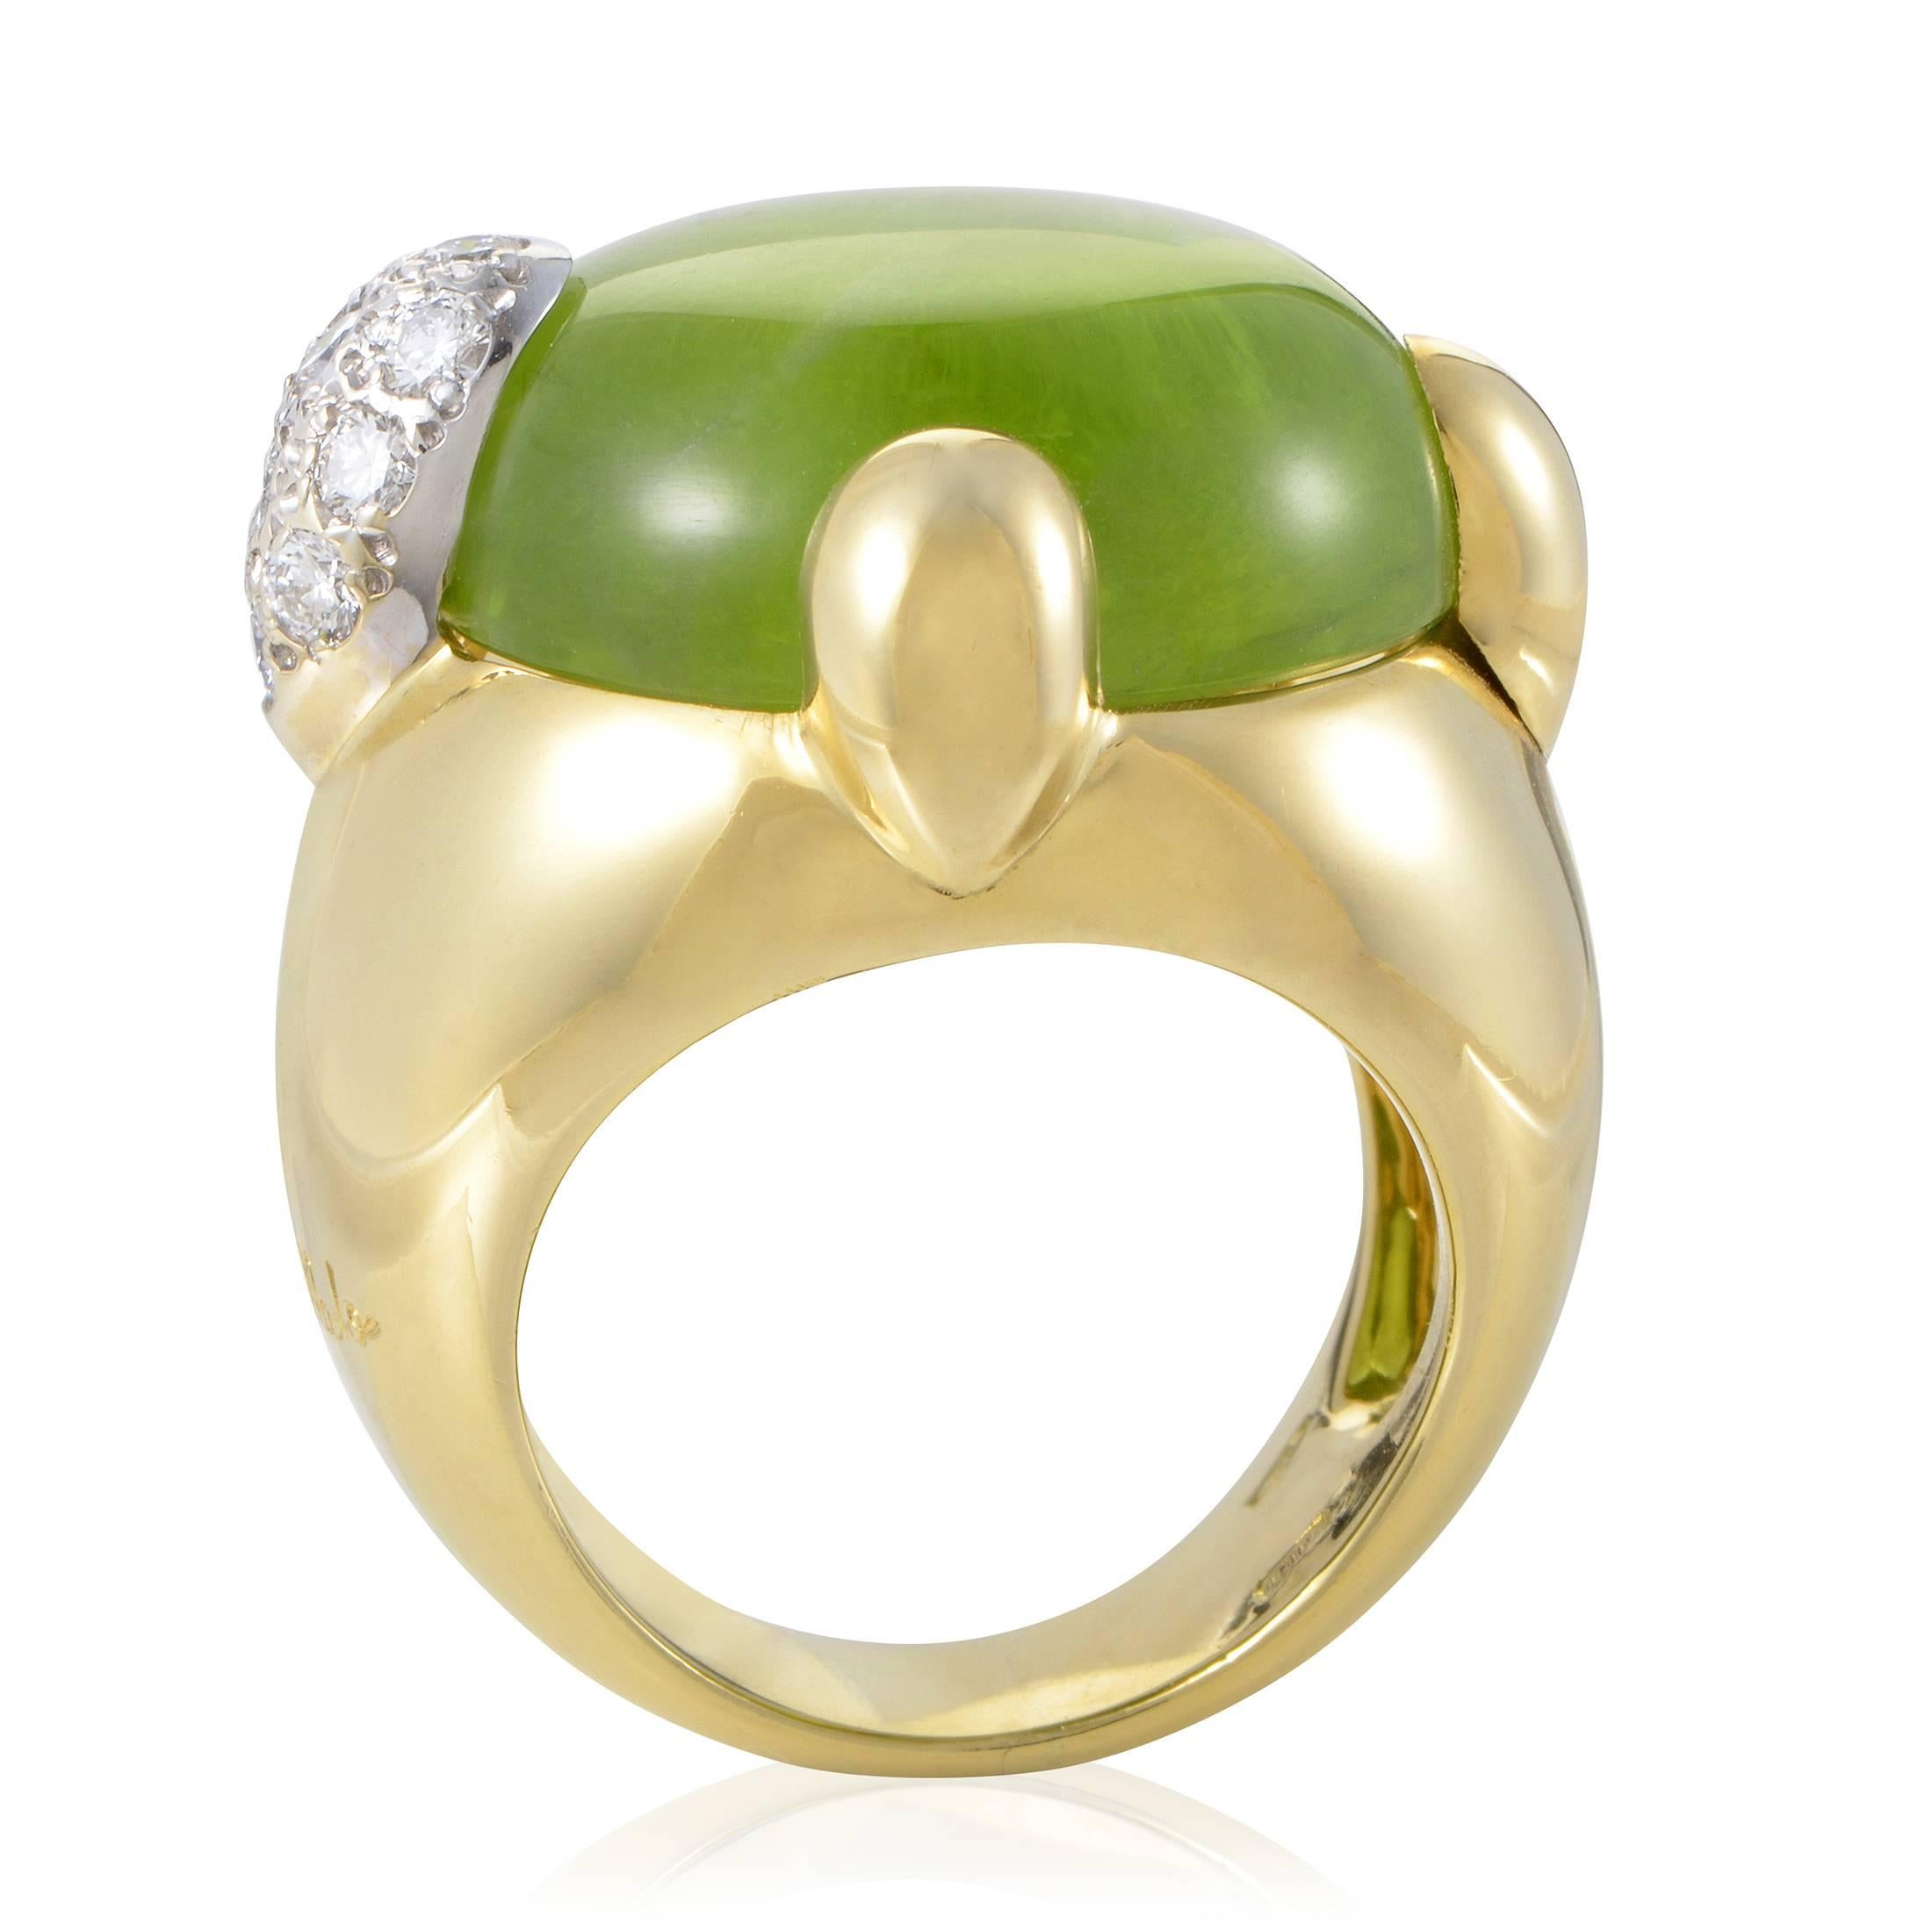 Complemented by a dazzling arrangement of diamonds weighing in total 0.30ct and adding its pleasant color to the elegant design, the fantastic peridot stone brilliantly completes this gorgeous 18K yellow gold ring from Pomellato.
Ring Size: 5.5 (50